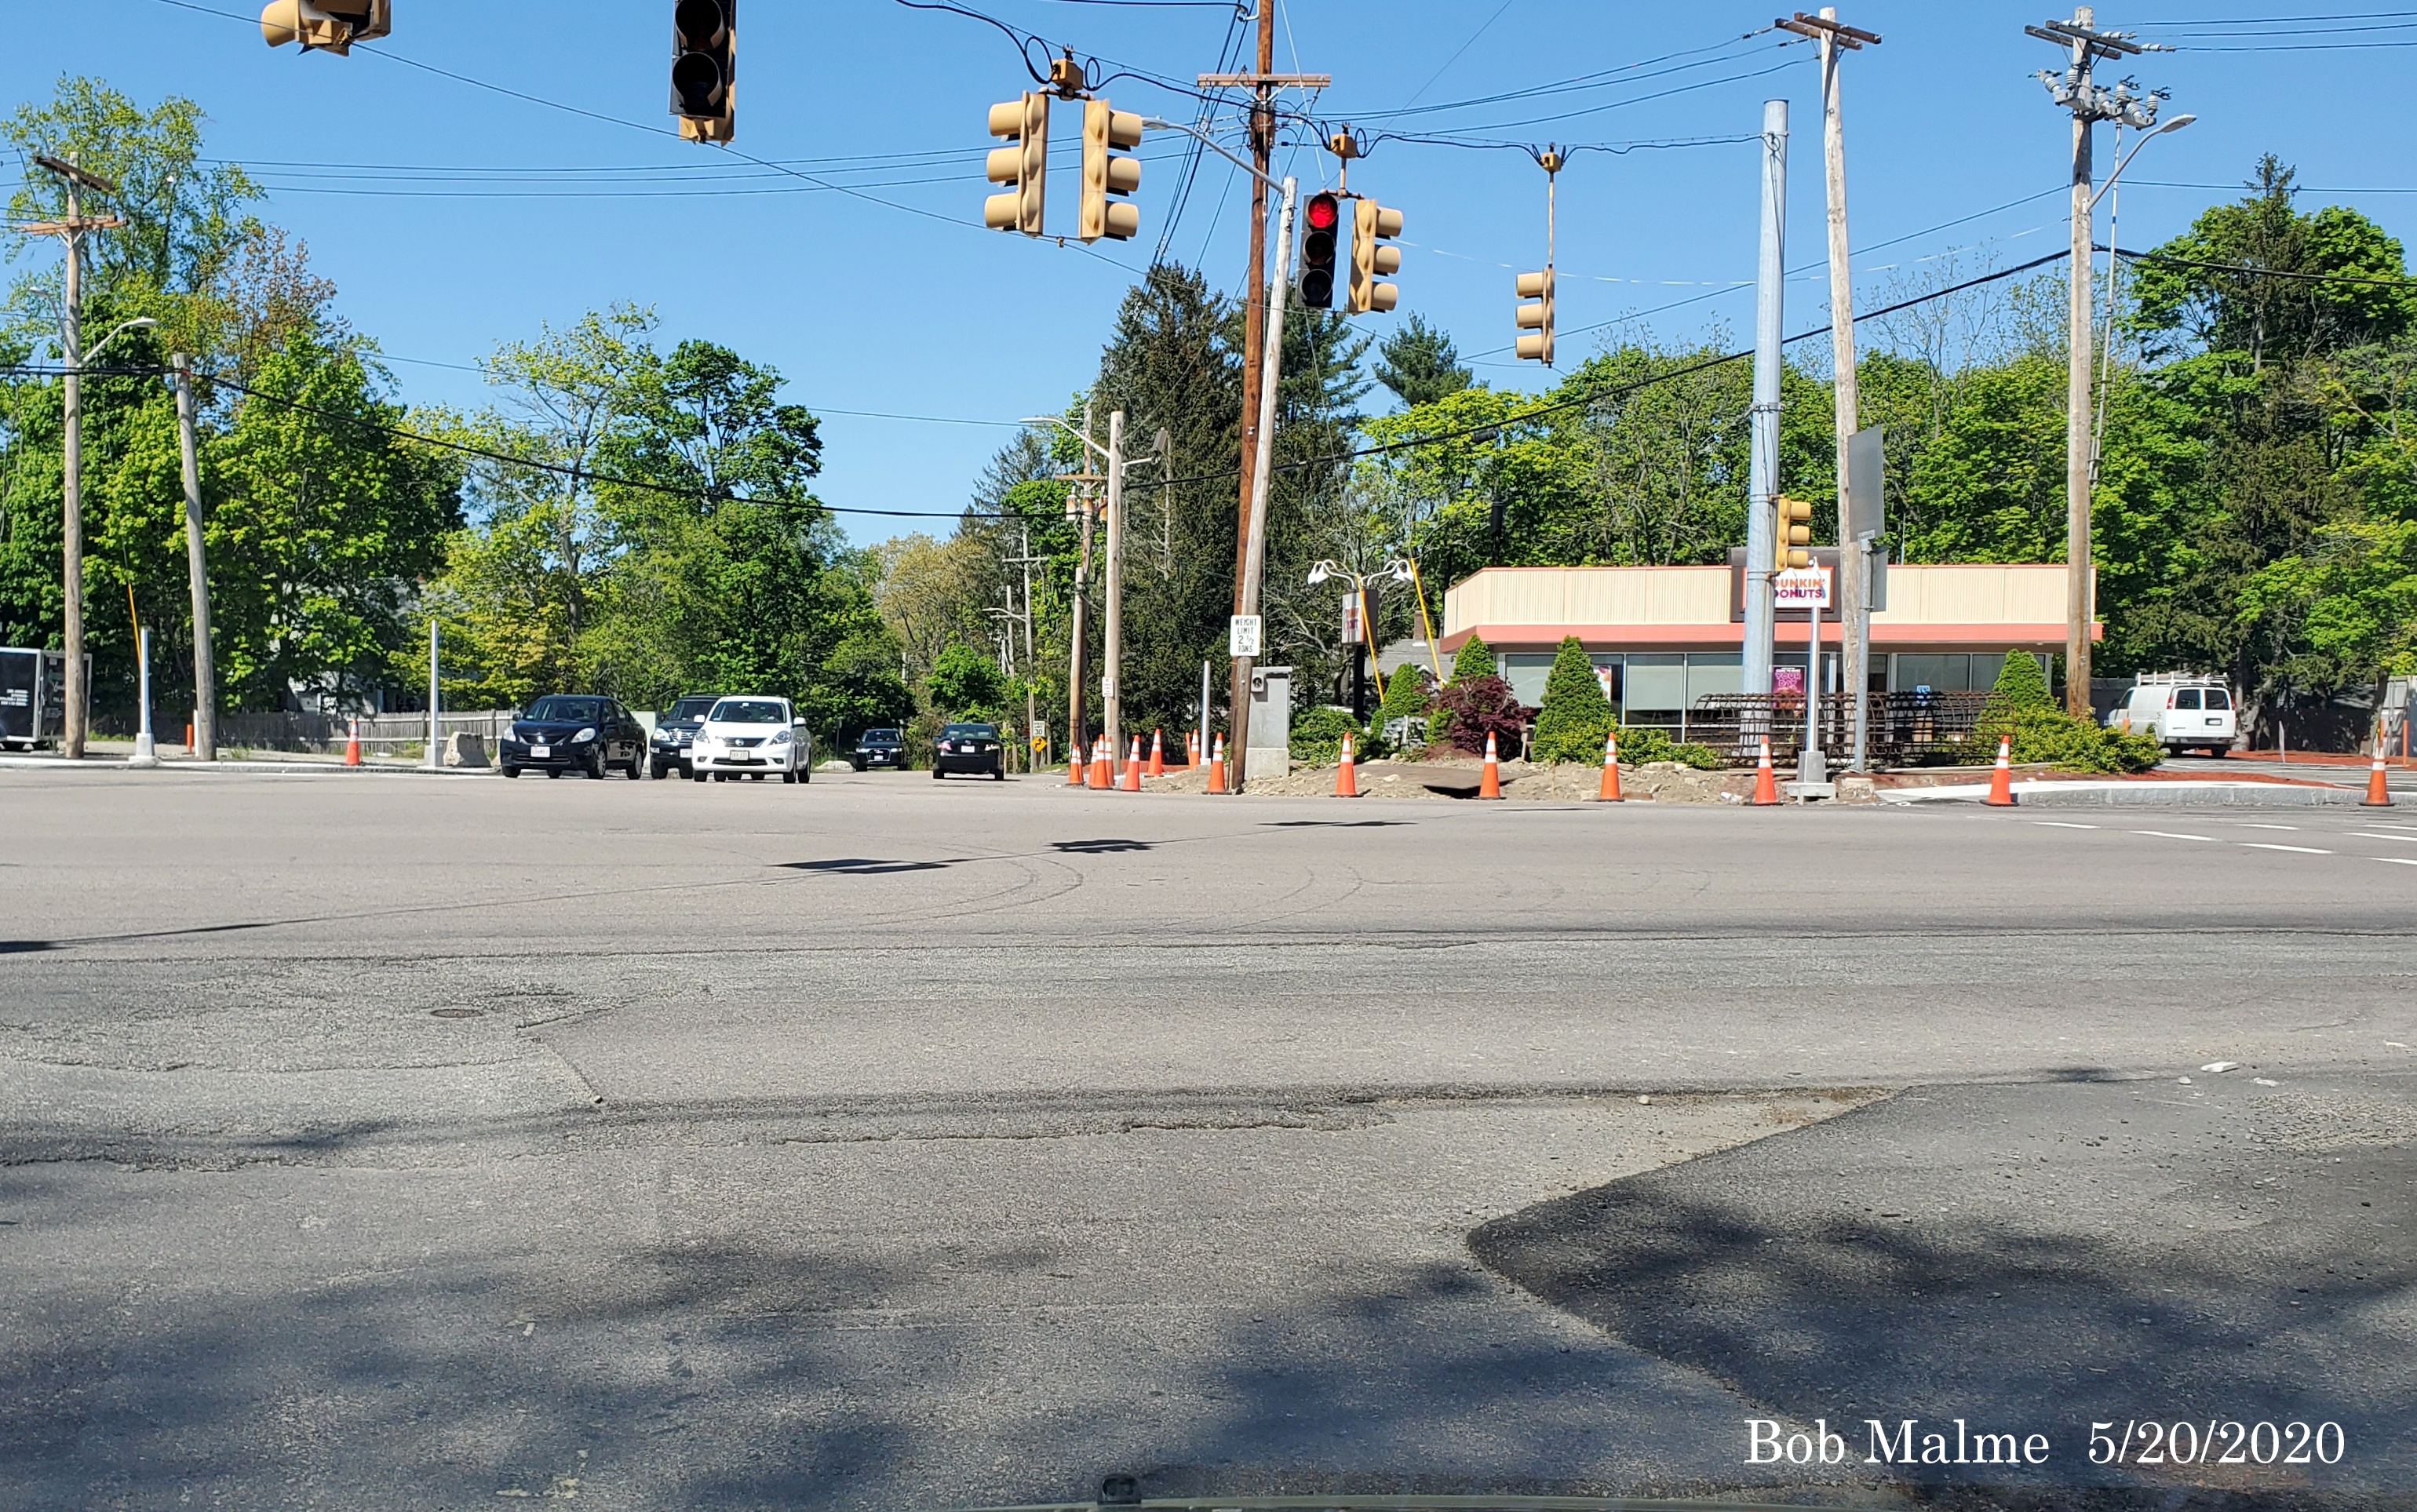 Image of intersection of Gardner and Whiting Streets showing installation of pedestrian signals, May 2020